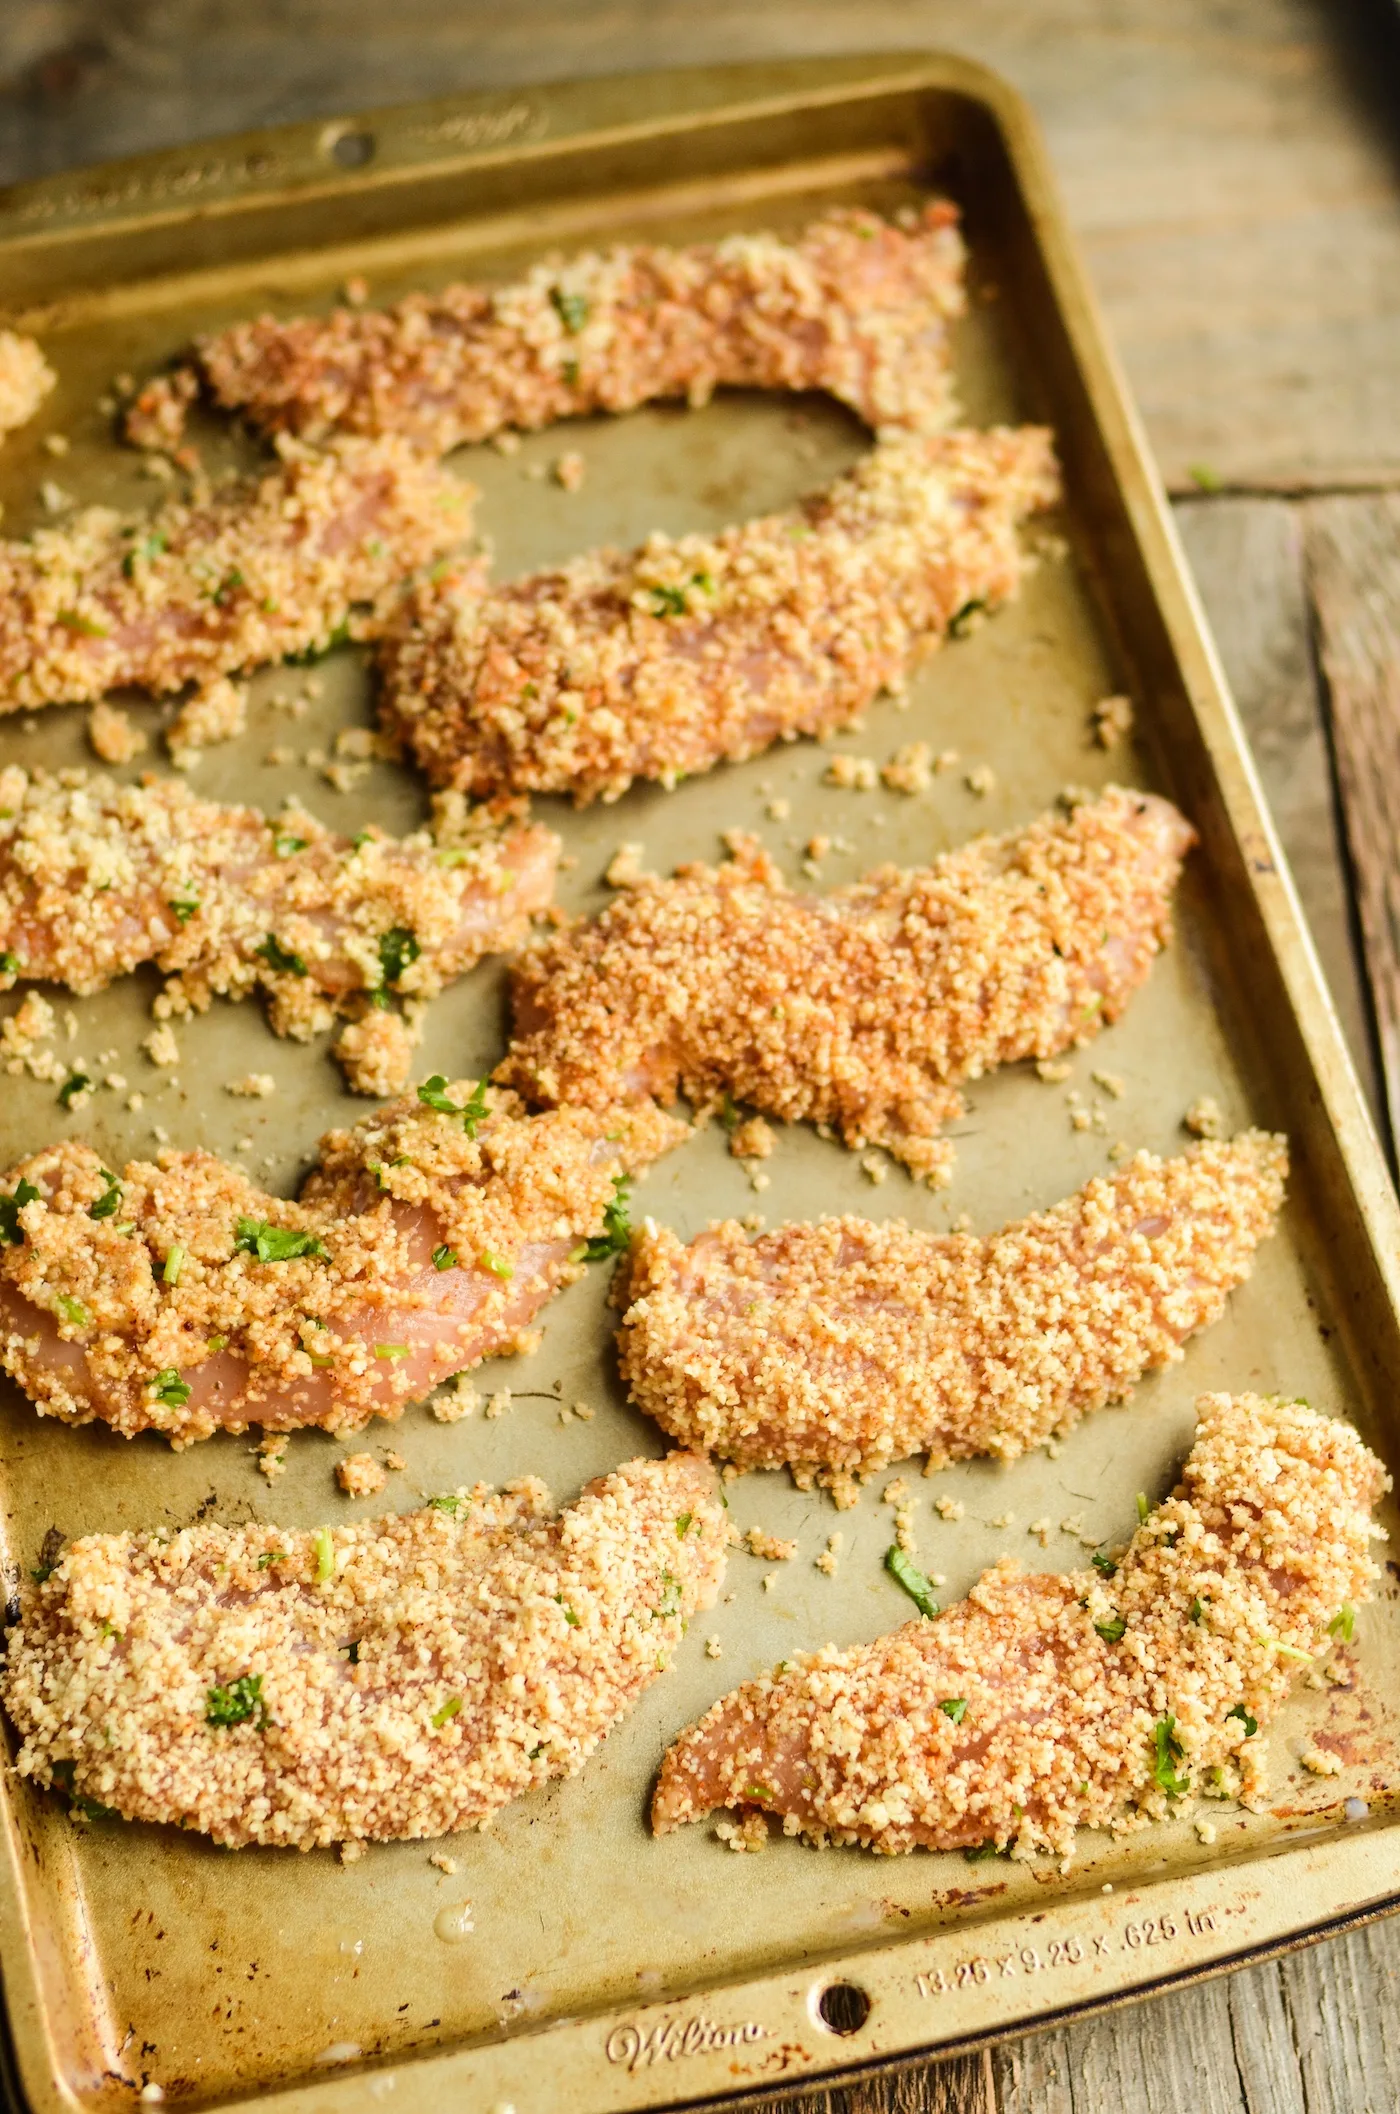 Chicken tenders coated in almond flour on a baking sheet